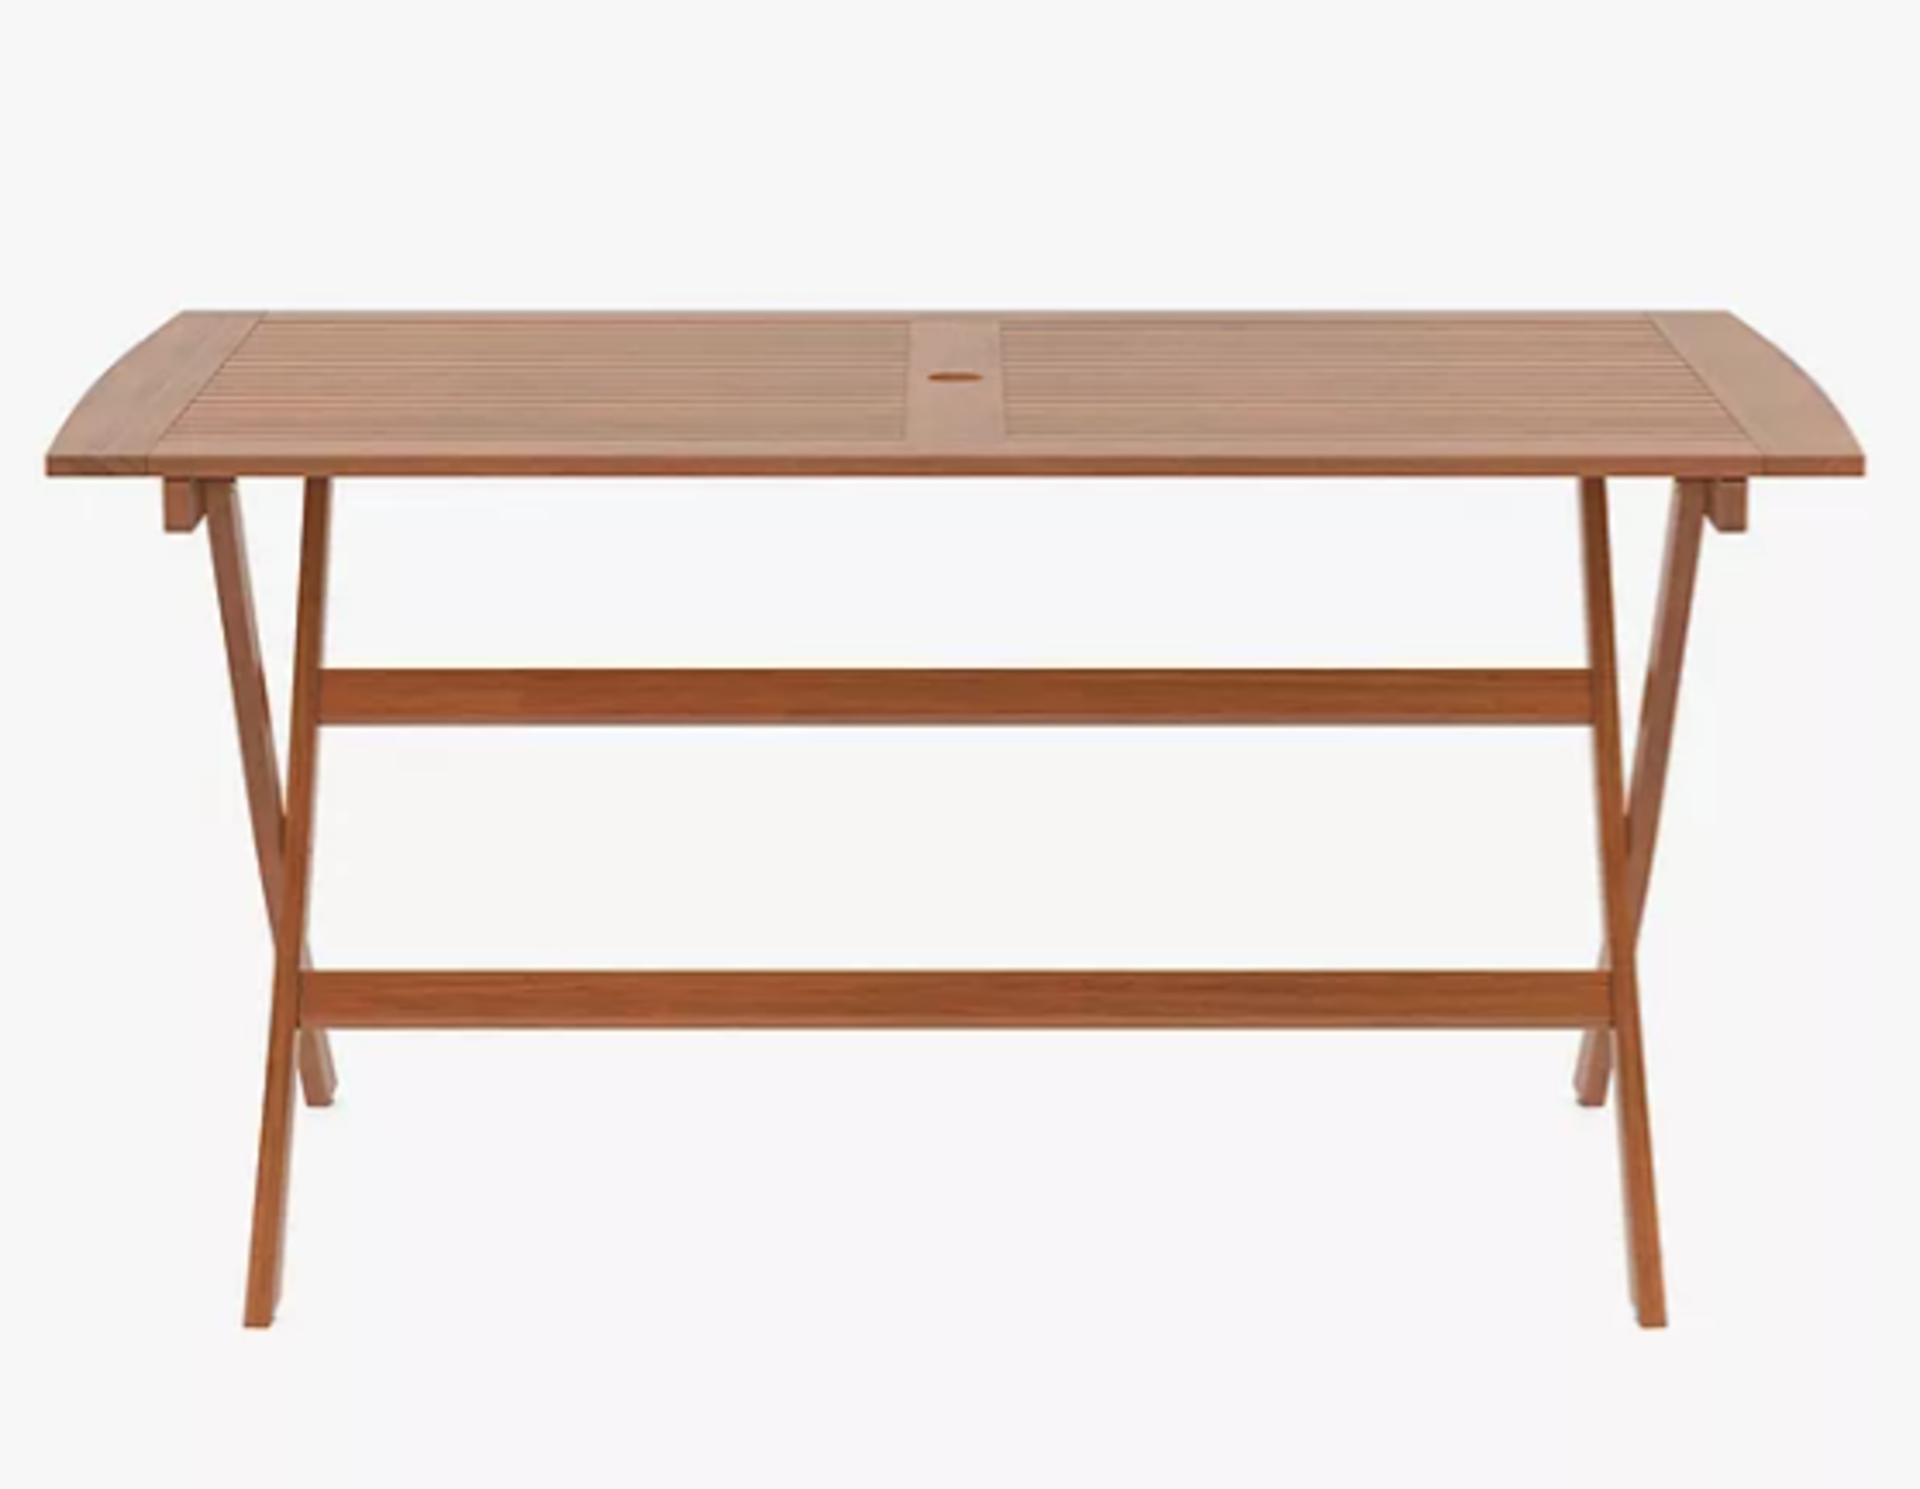 BRAND NEW JOHN LEWIS 6-Seater Folding Garden Dining Table, FSC-Certified (Eucalyptus Wood), Natural. - Image 2 of 3